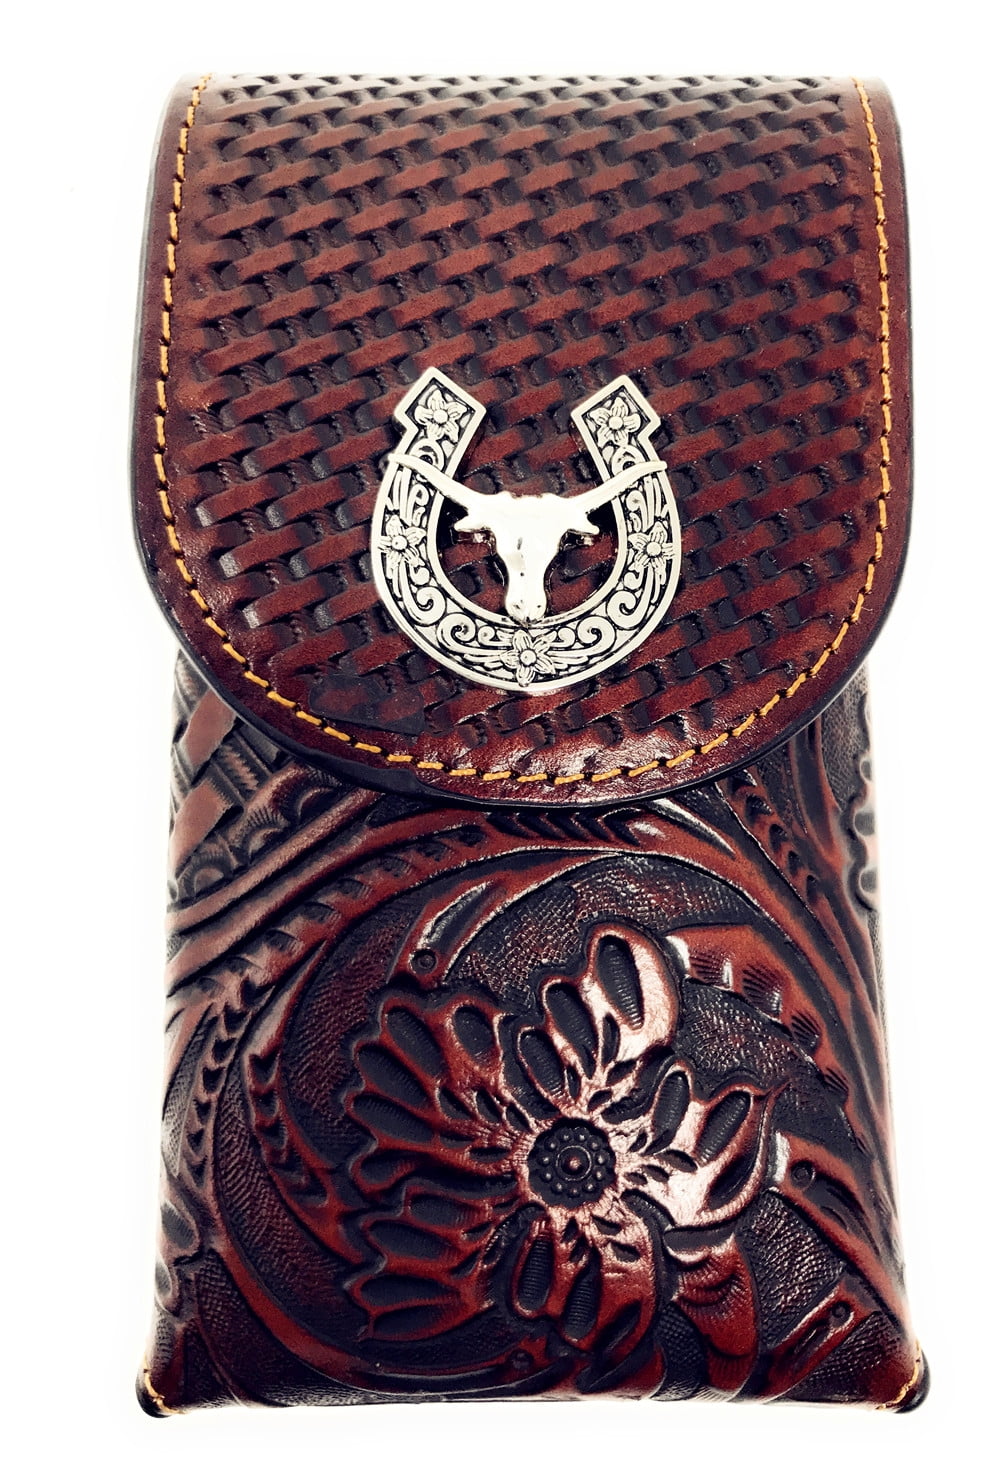 Western Cowboy Genuine Horseshoe Leather Cut Design With Belt Loop Cell Phone Holster Case.